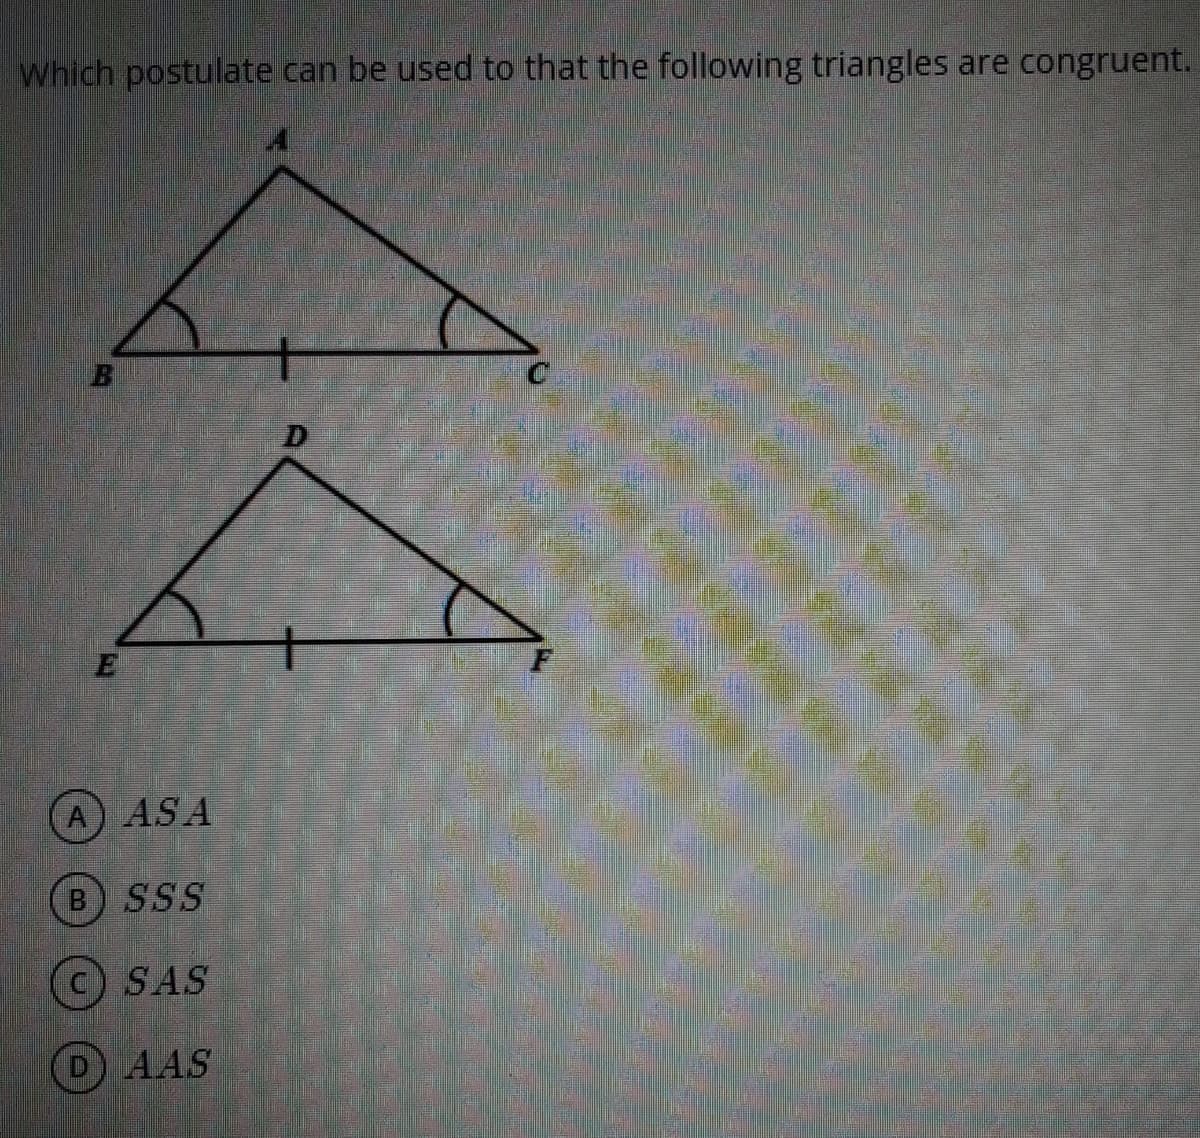 which postulate can be used to that the following triangles are congruent.
A) ASA
B) SSS
SAS
AAS
